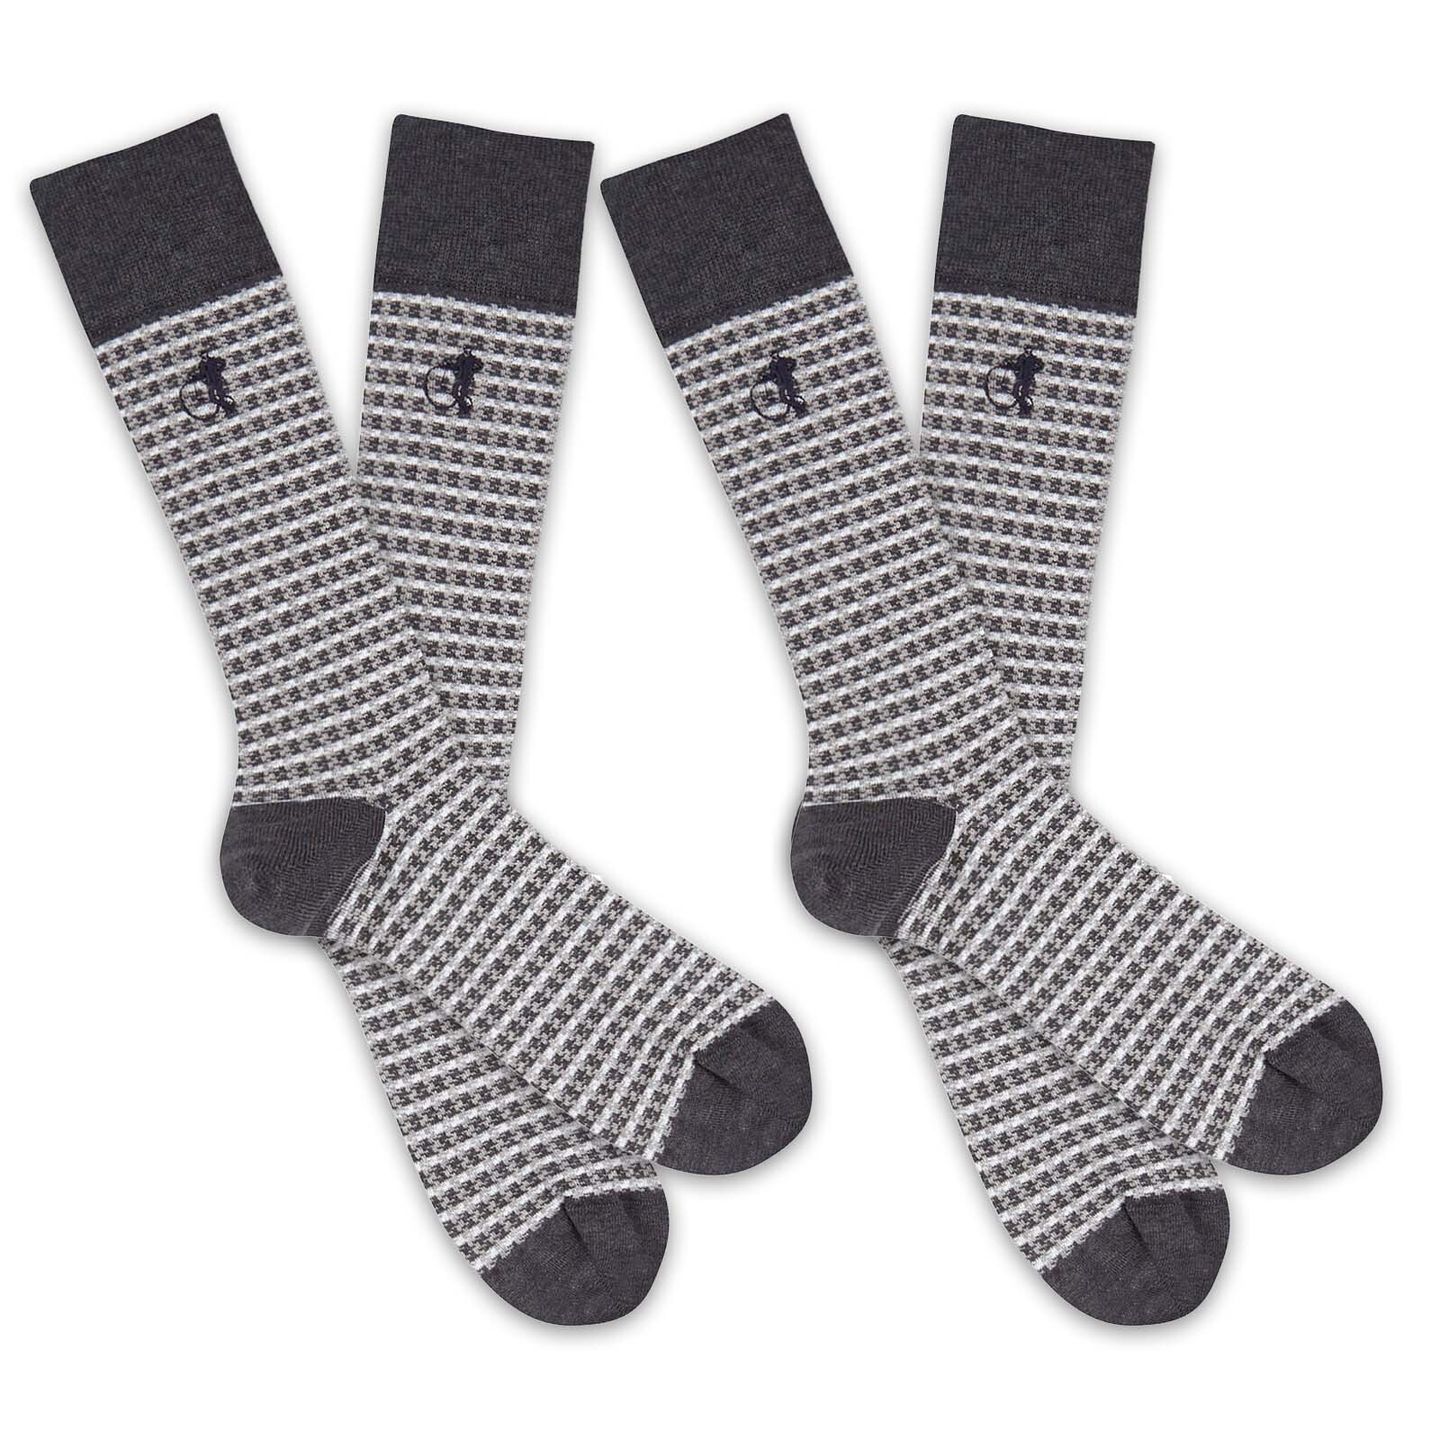 2 pairs of grey and white chequered socks from the Shaken and Stirred Collection